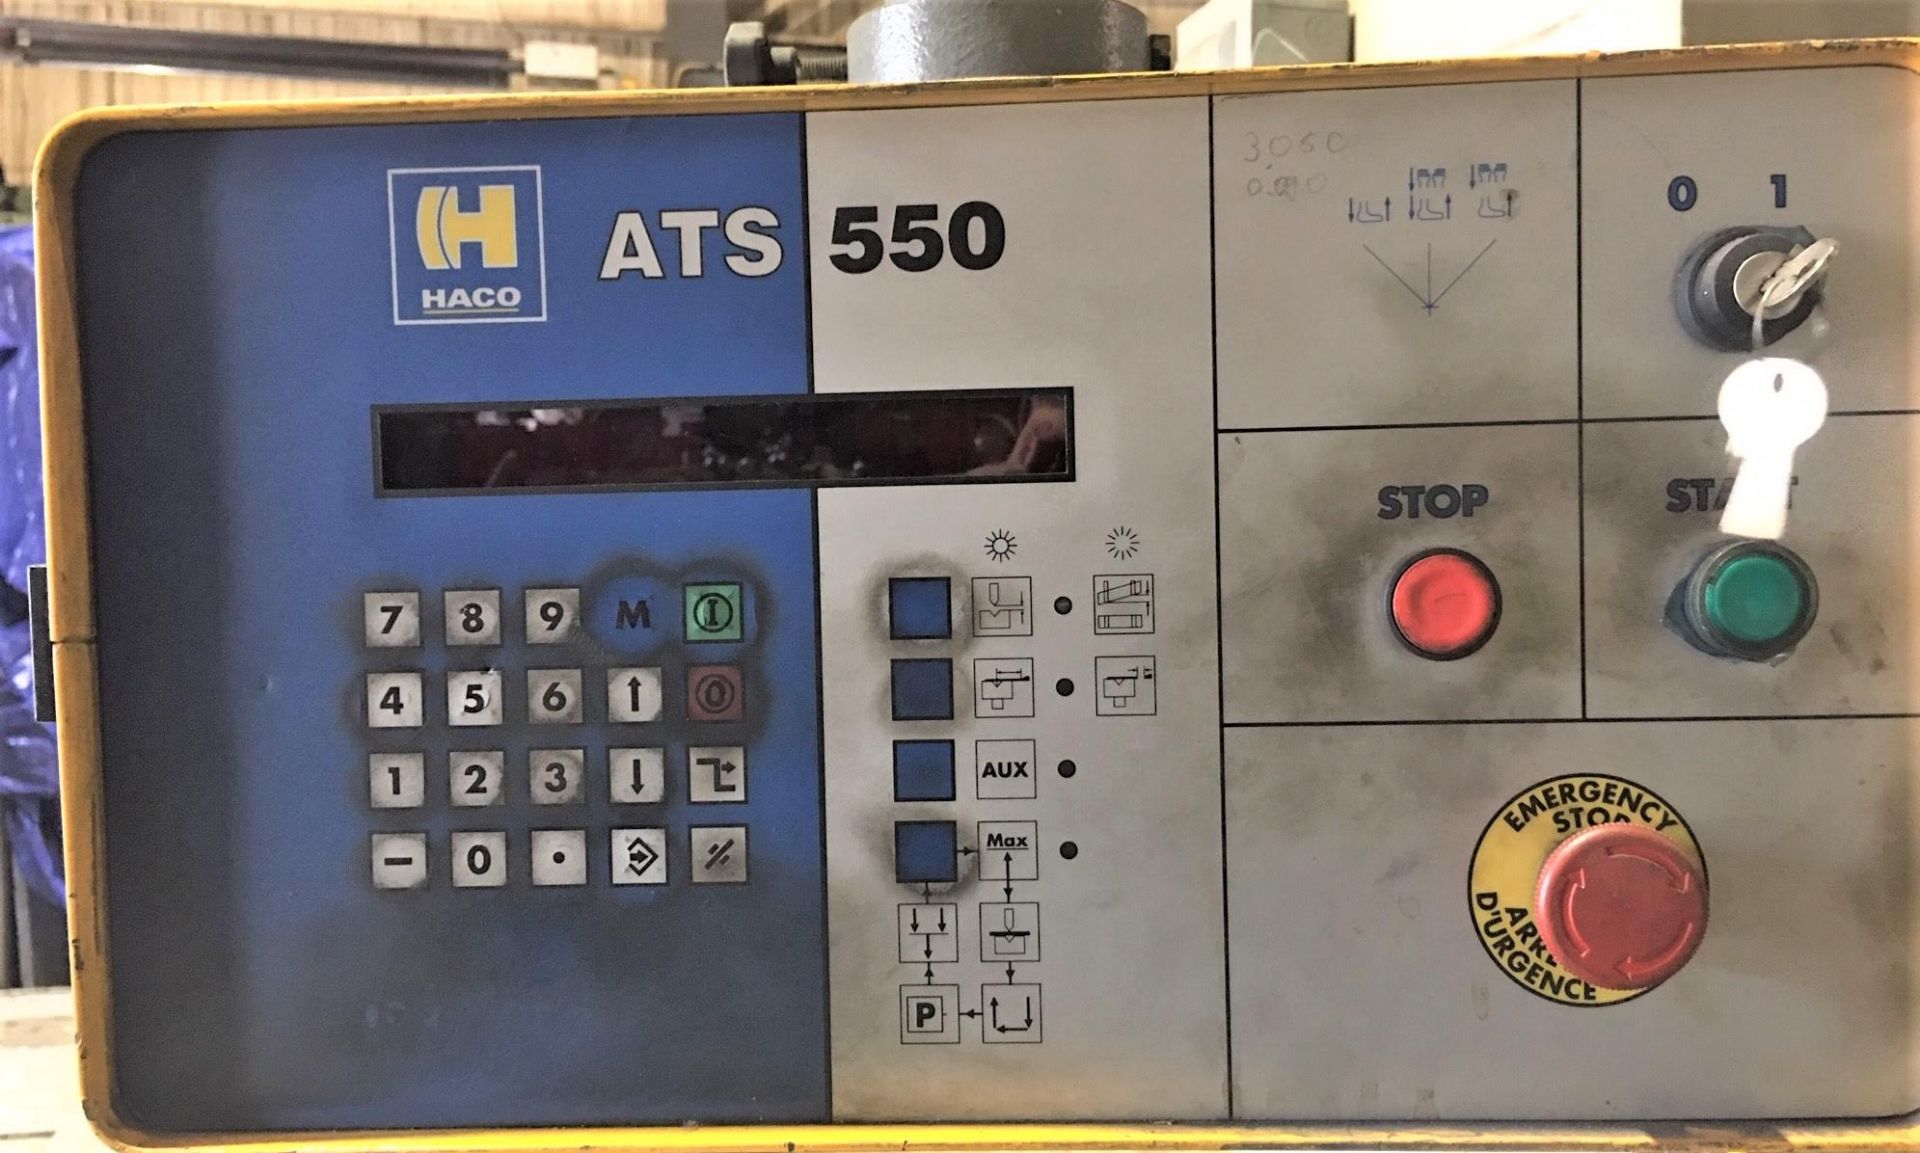 Haco Atlantic CNC Hydraulic Press Brake 120 Ton x 10', Located In Painesville, OH - 8615P - Image 11 of 14